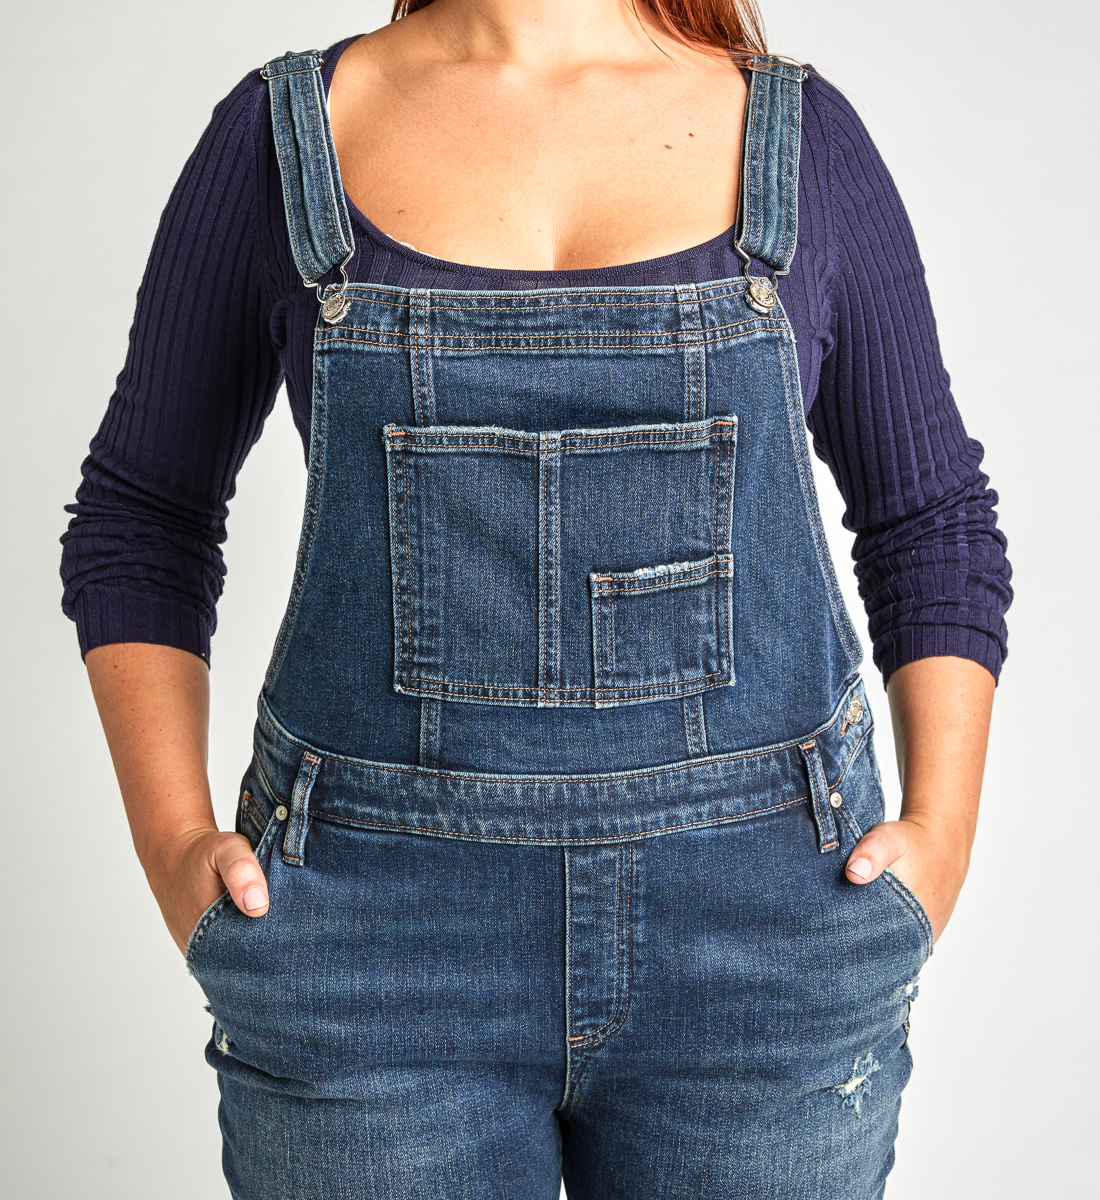 Spirio Women Slim Fit with Pockets Jean Strappy Large Size Baggy Overalls